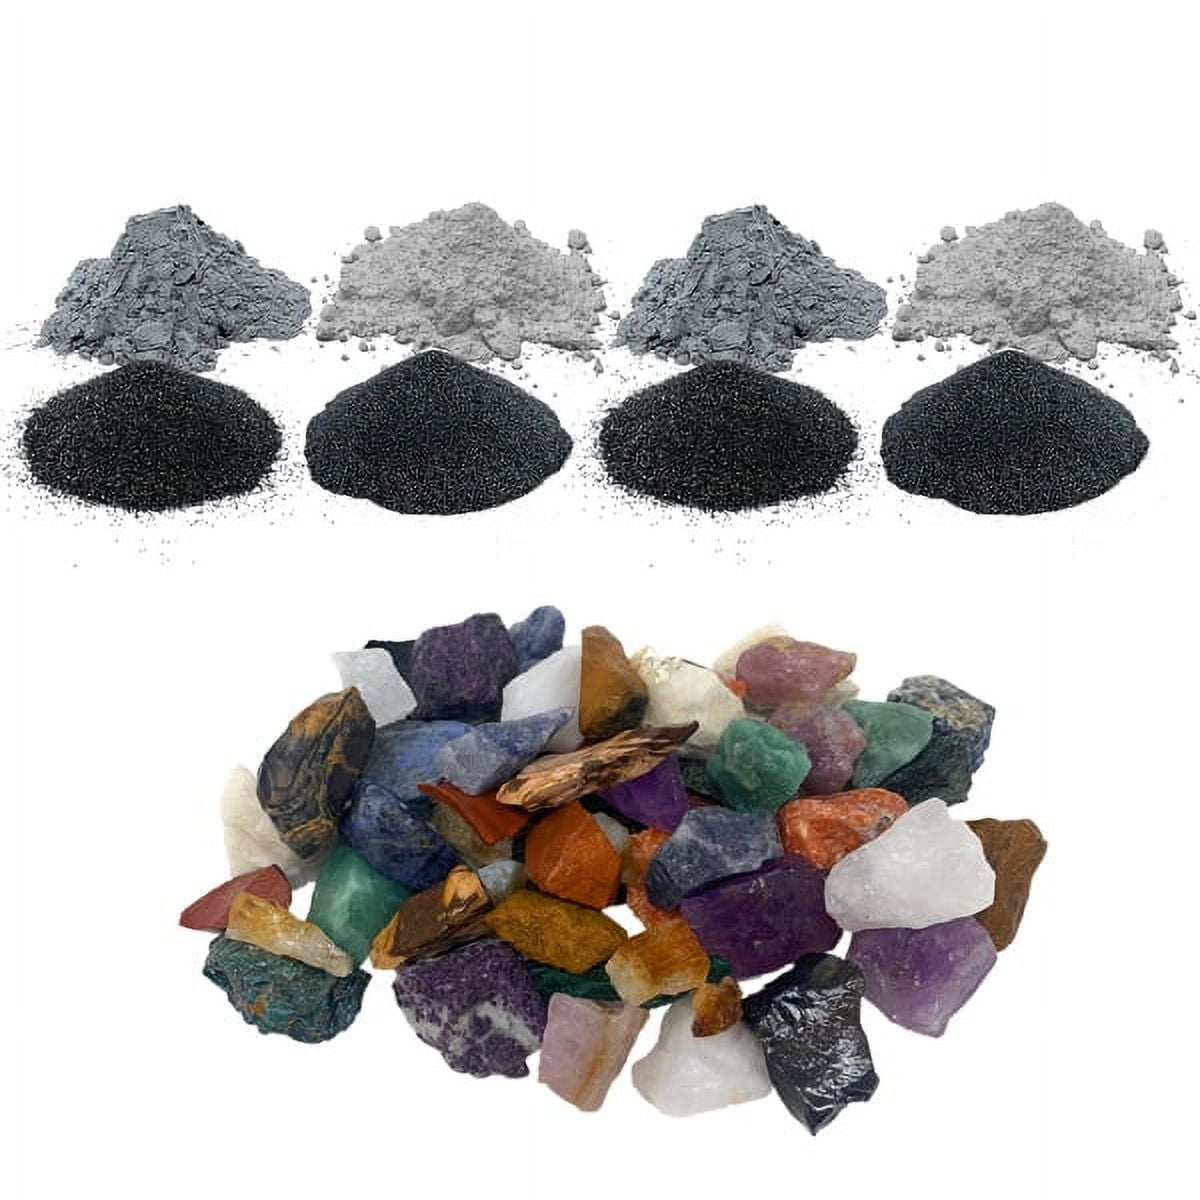  10 LBS Total Weight Rock Tumbler Grit Set, 4 Step Tumbling  Media Refill-Coarse/Medium/Pre-Polished/Final Polish, Silicone Carbide  Polisher Grit for Any Rock Tumbler, Rock Polisher, Stone Polisher : Toys &  Games